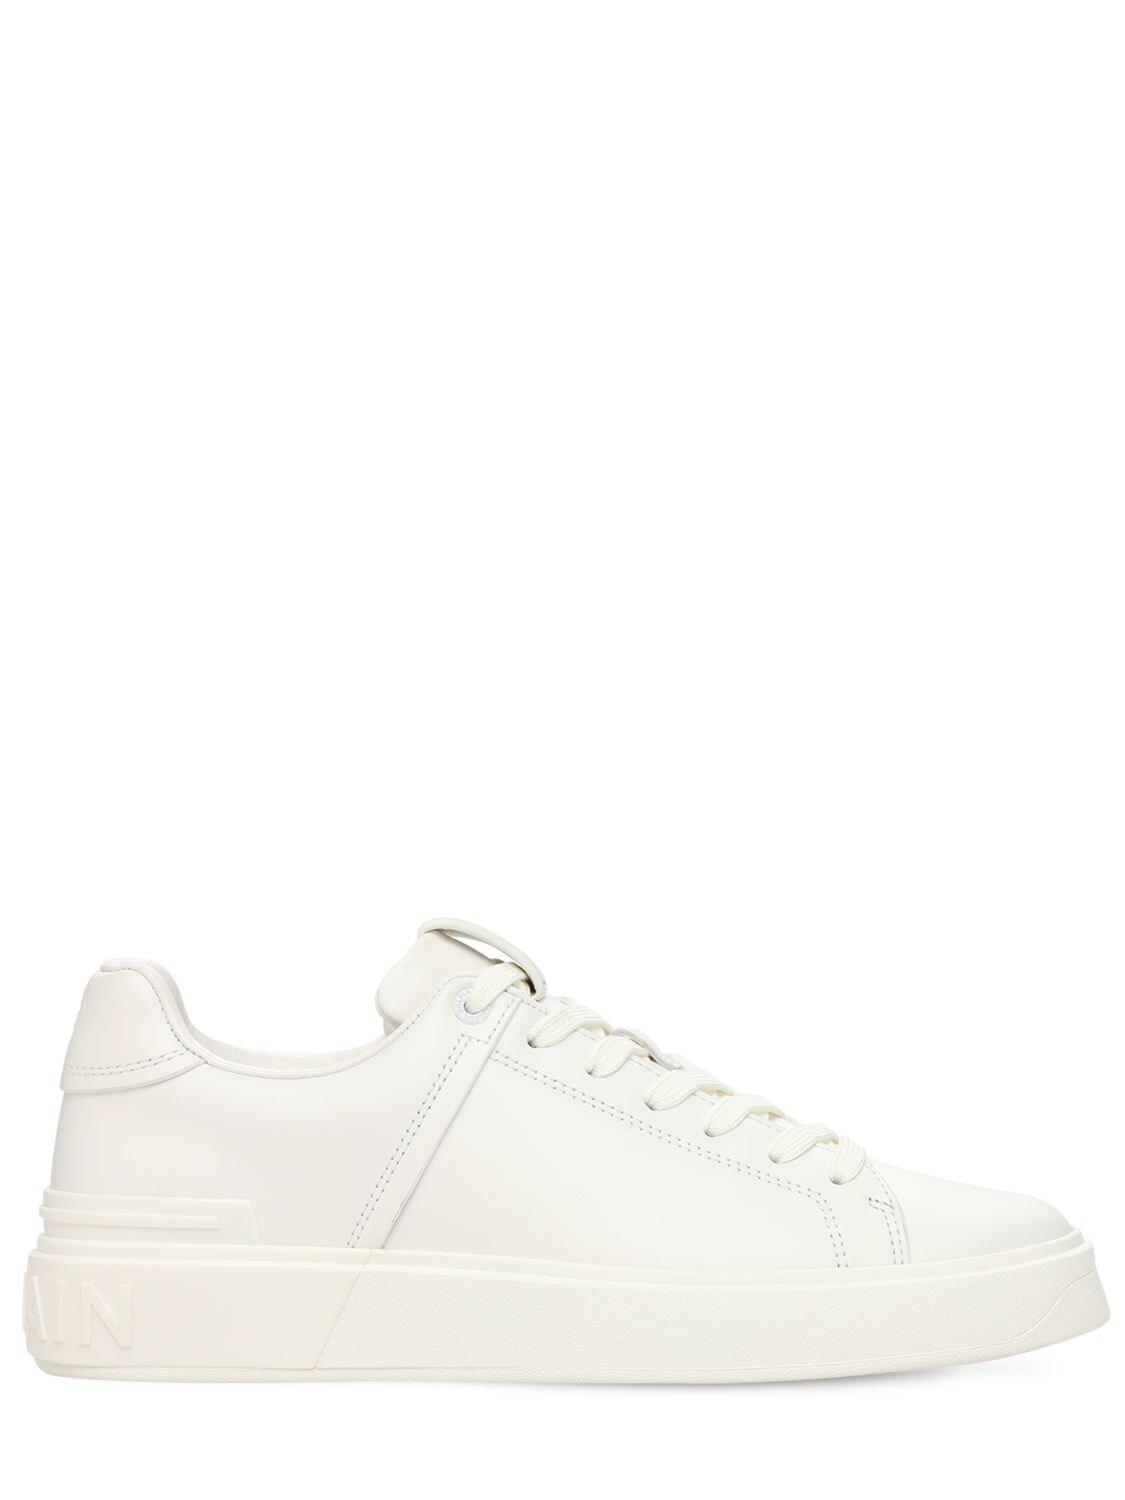 Balmain 20mm B Court Classic Leather Sneakers in White | Lyst